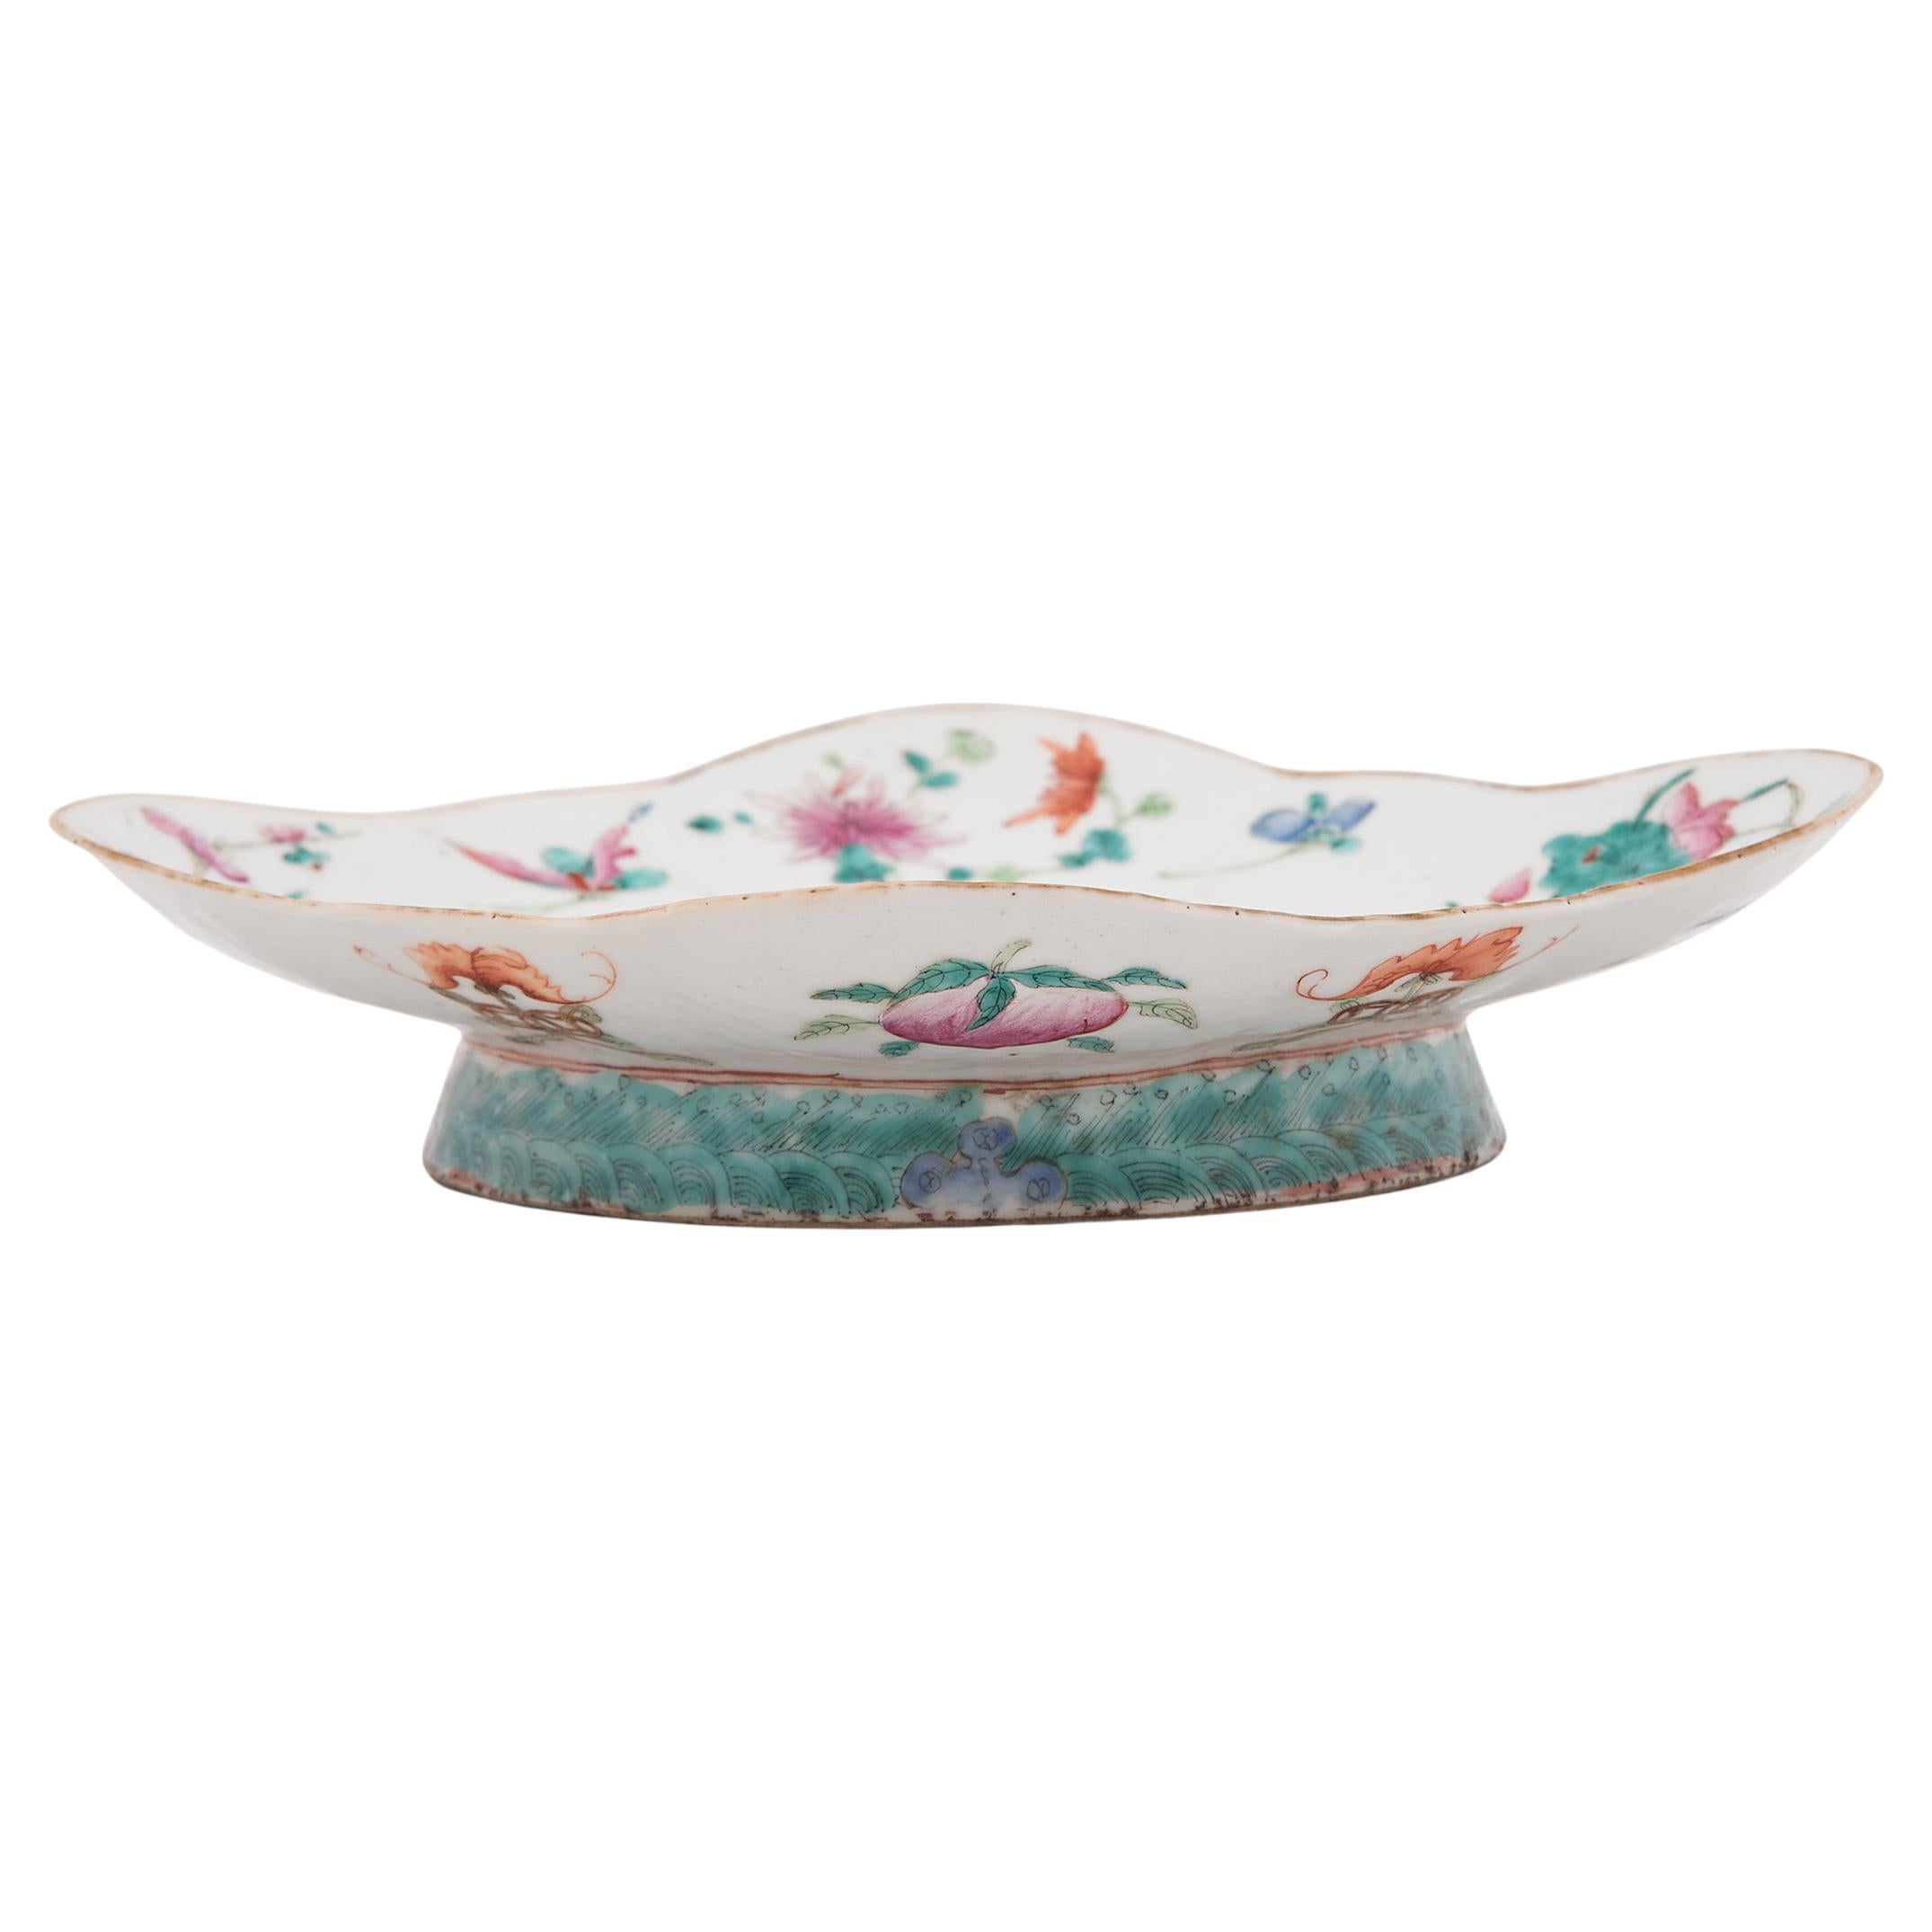 Chinese Footed Offering Bowl with Mythical Figures, c. 1850